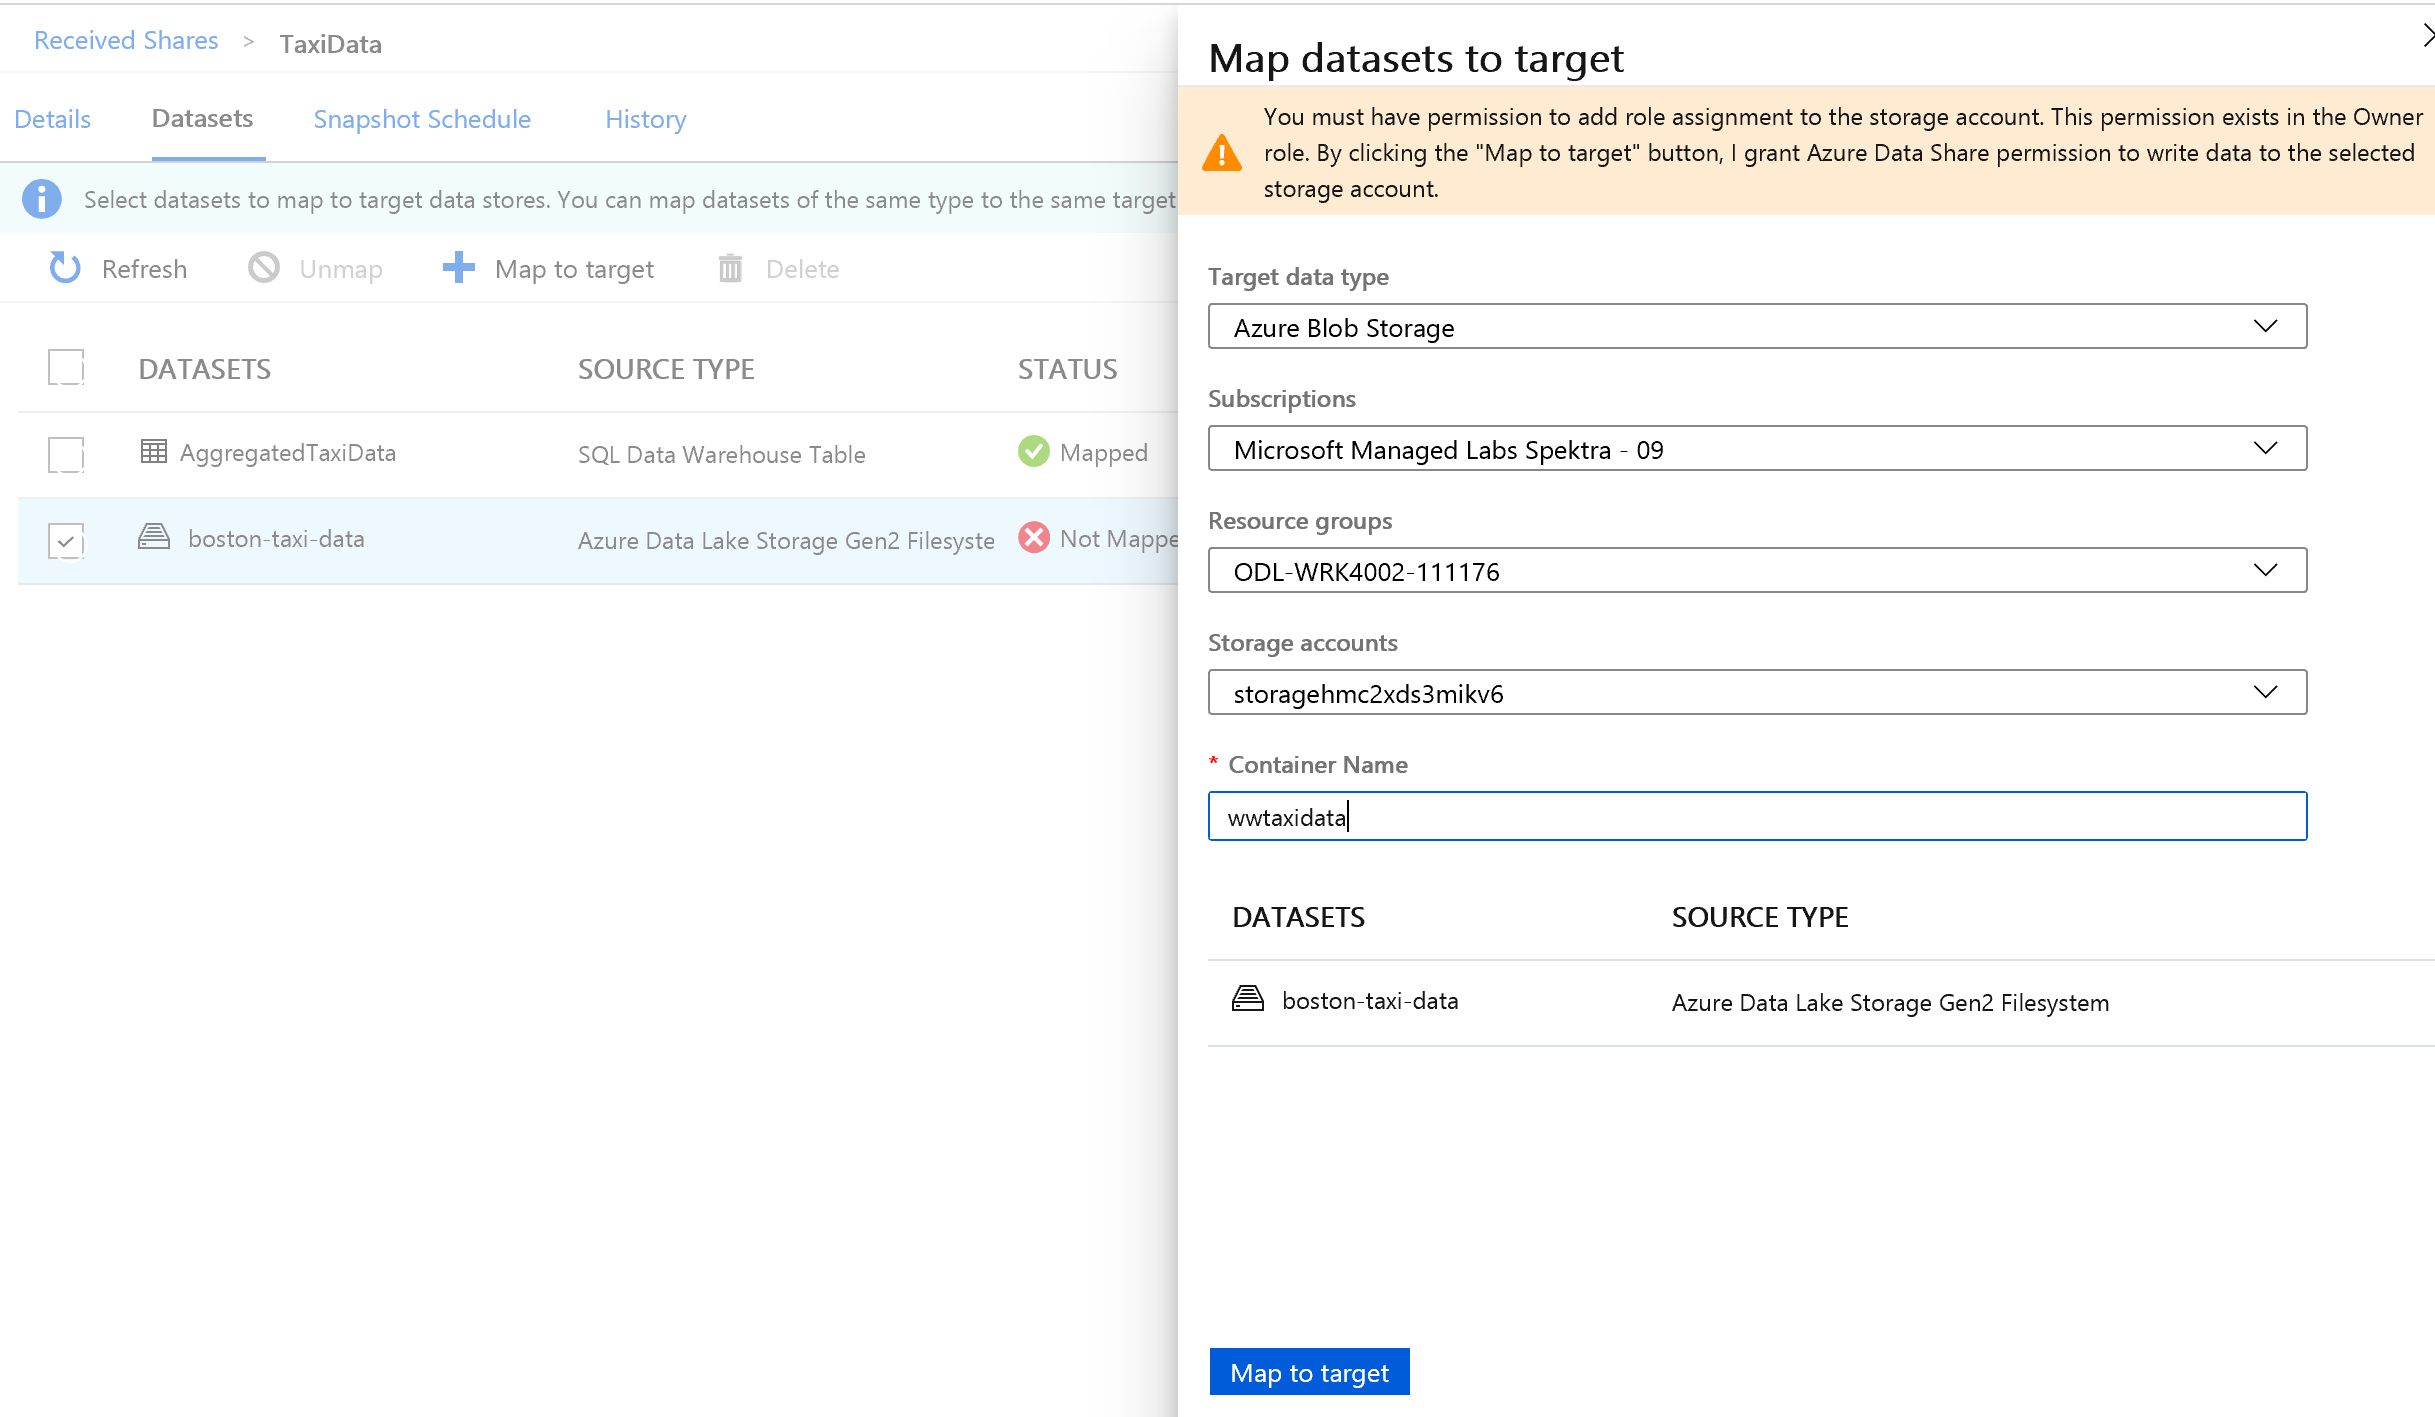 Screenshot from the Azure portal of map datasets to a target Azure Blob Storage.